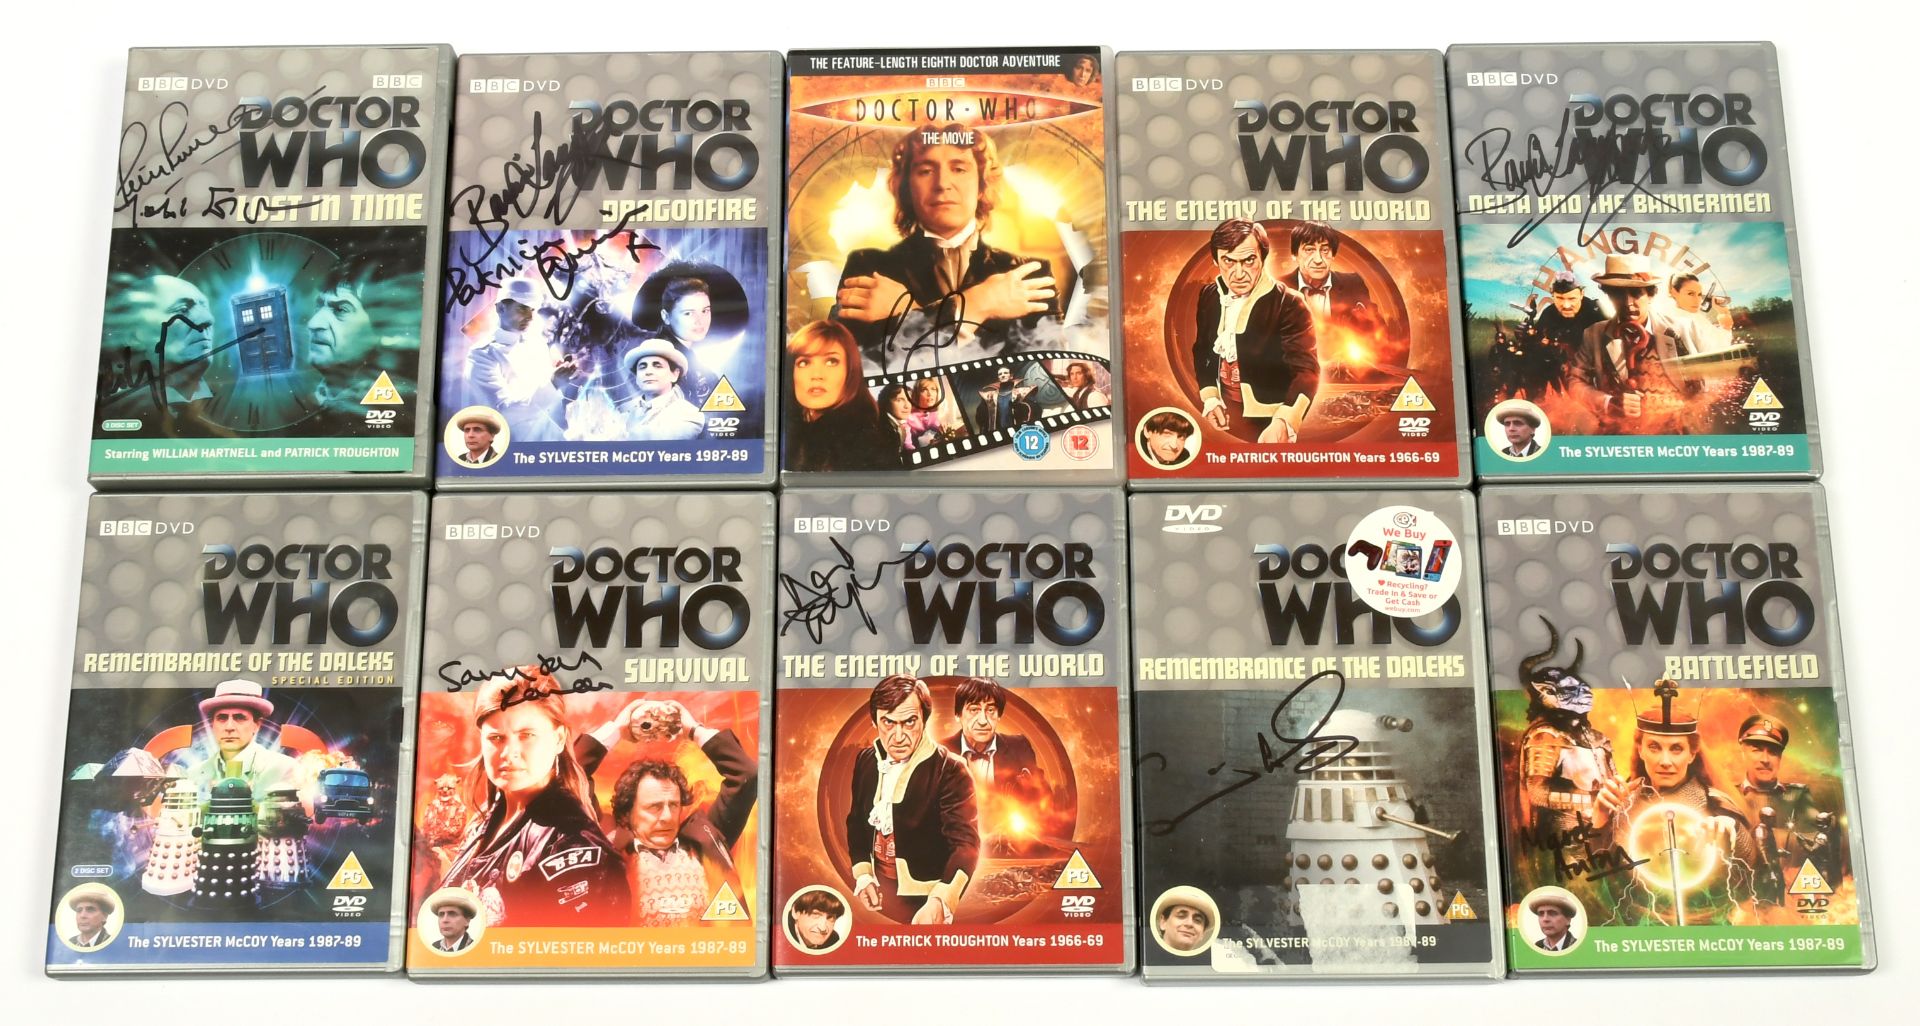 BBC Doctor Who signed DVDs